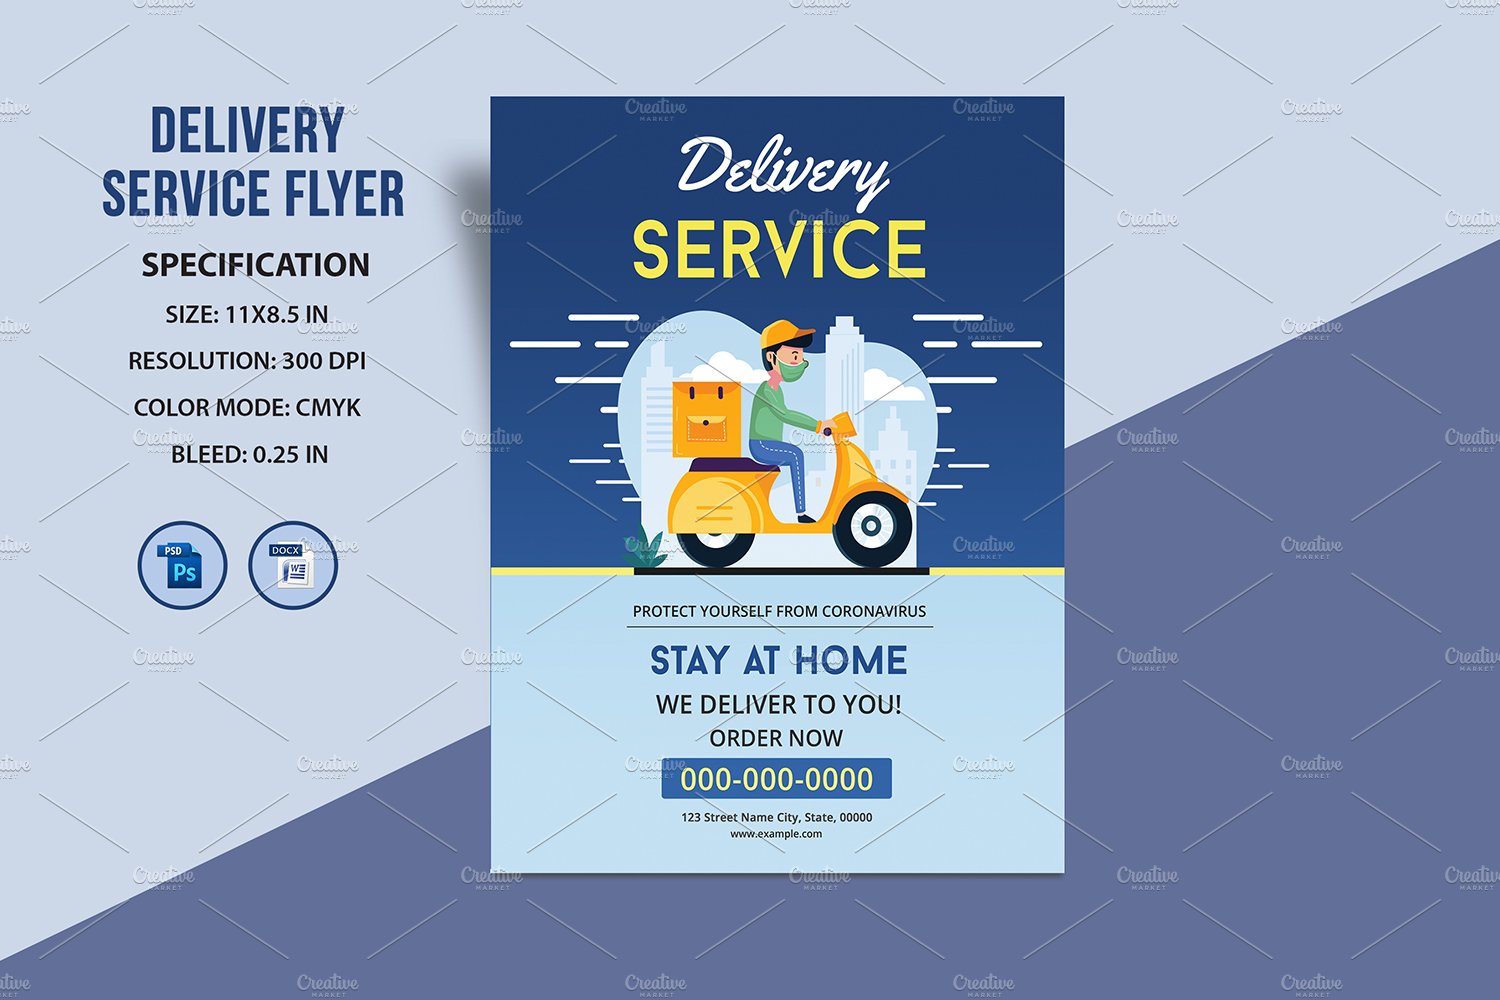 Advantages Of Choosing Flyer Delivery Service